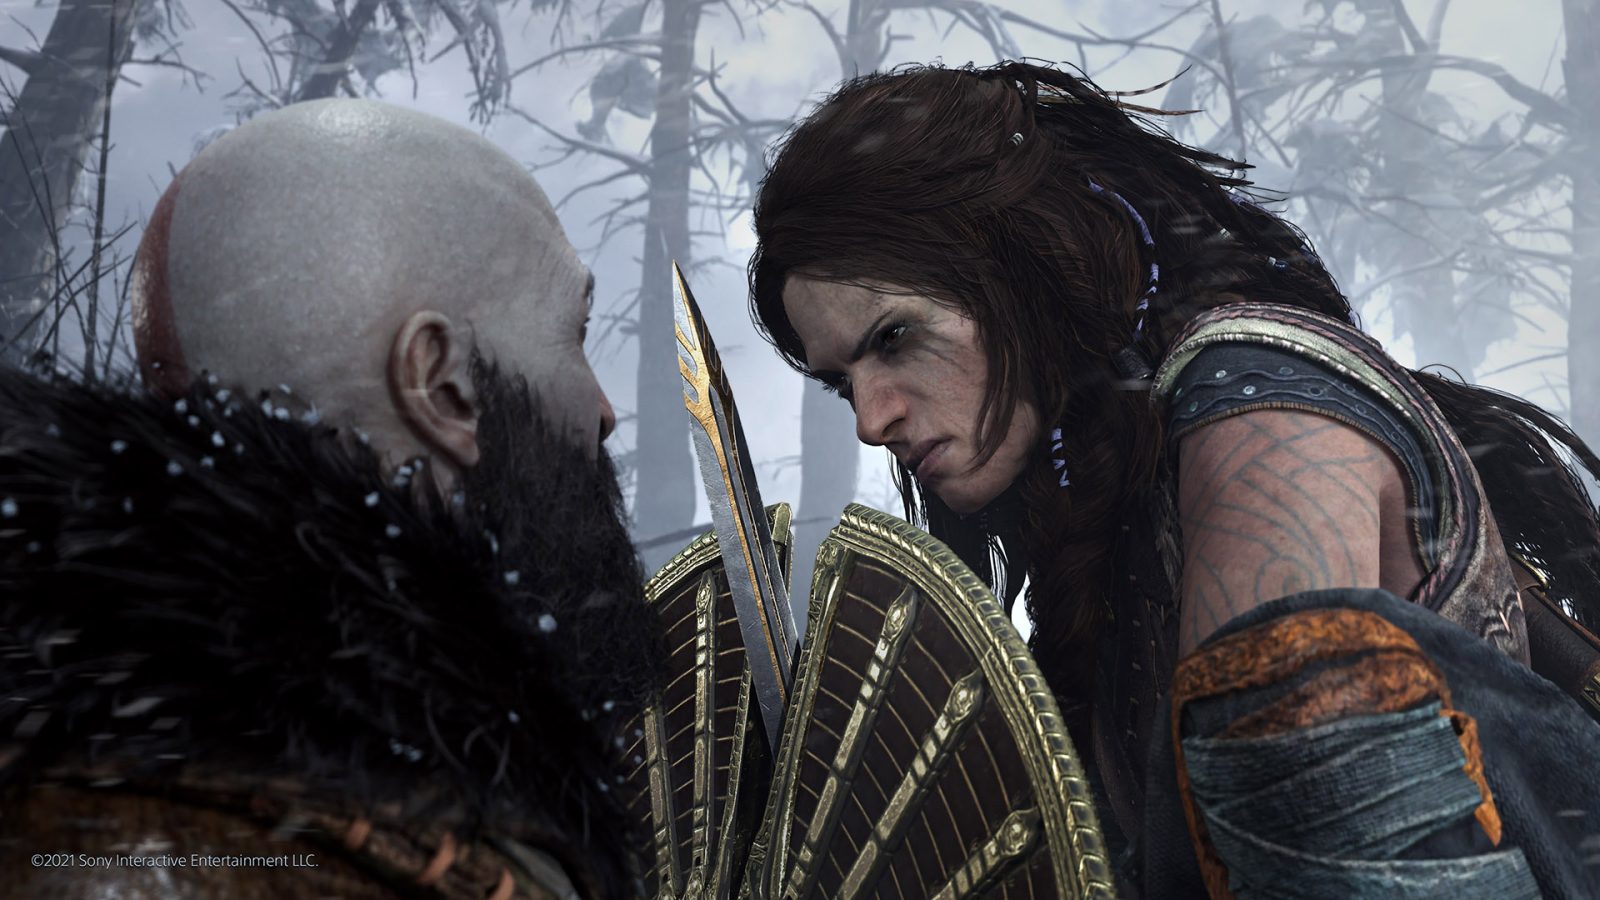 The camera work in this game is brilliant. Kratos and Freya are